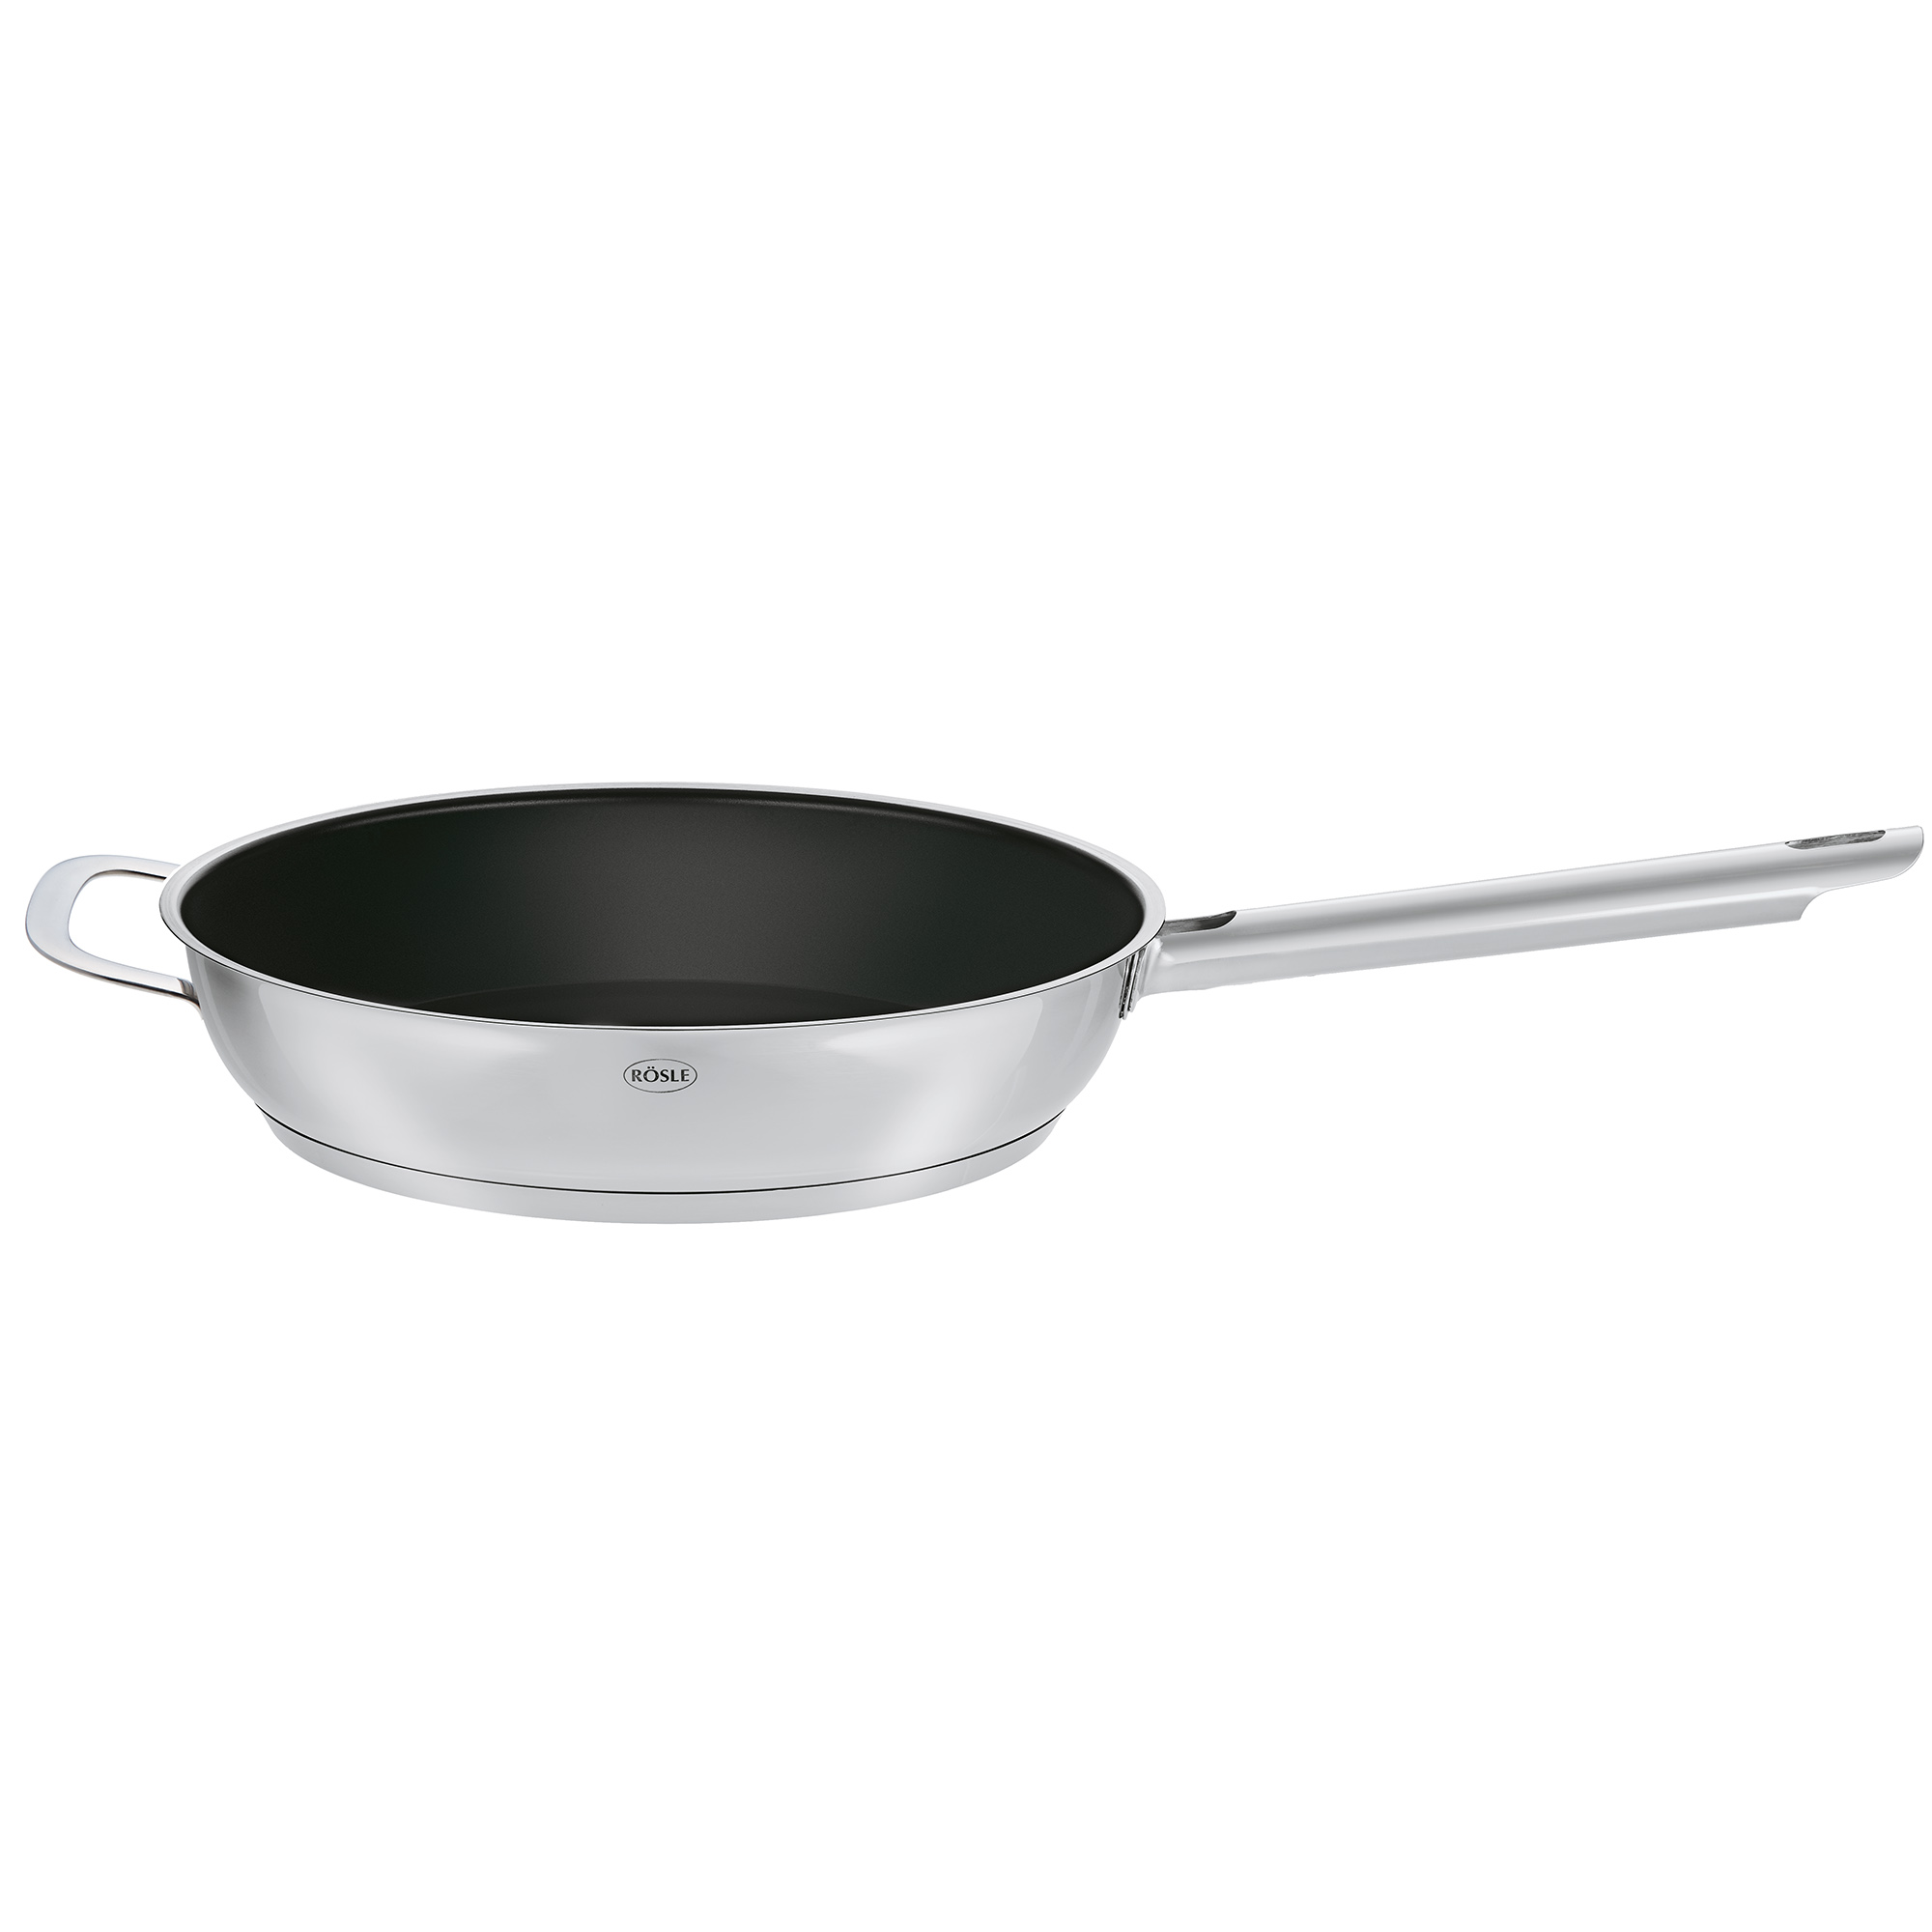 Frying Pan Elegance with non-stick coating Ø 32 cm|12.6 in. with opposite Handle